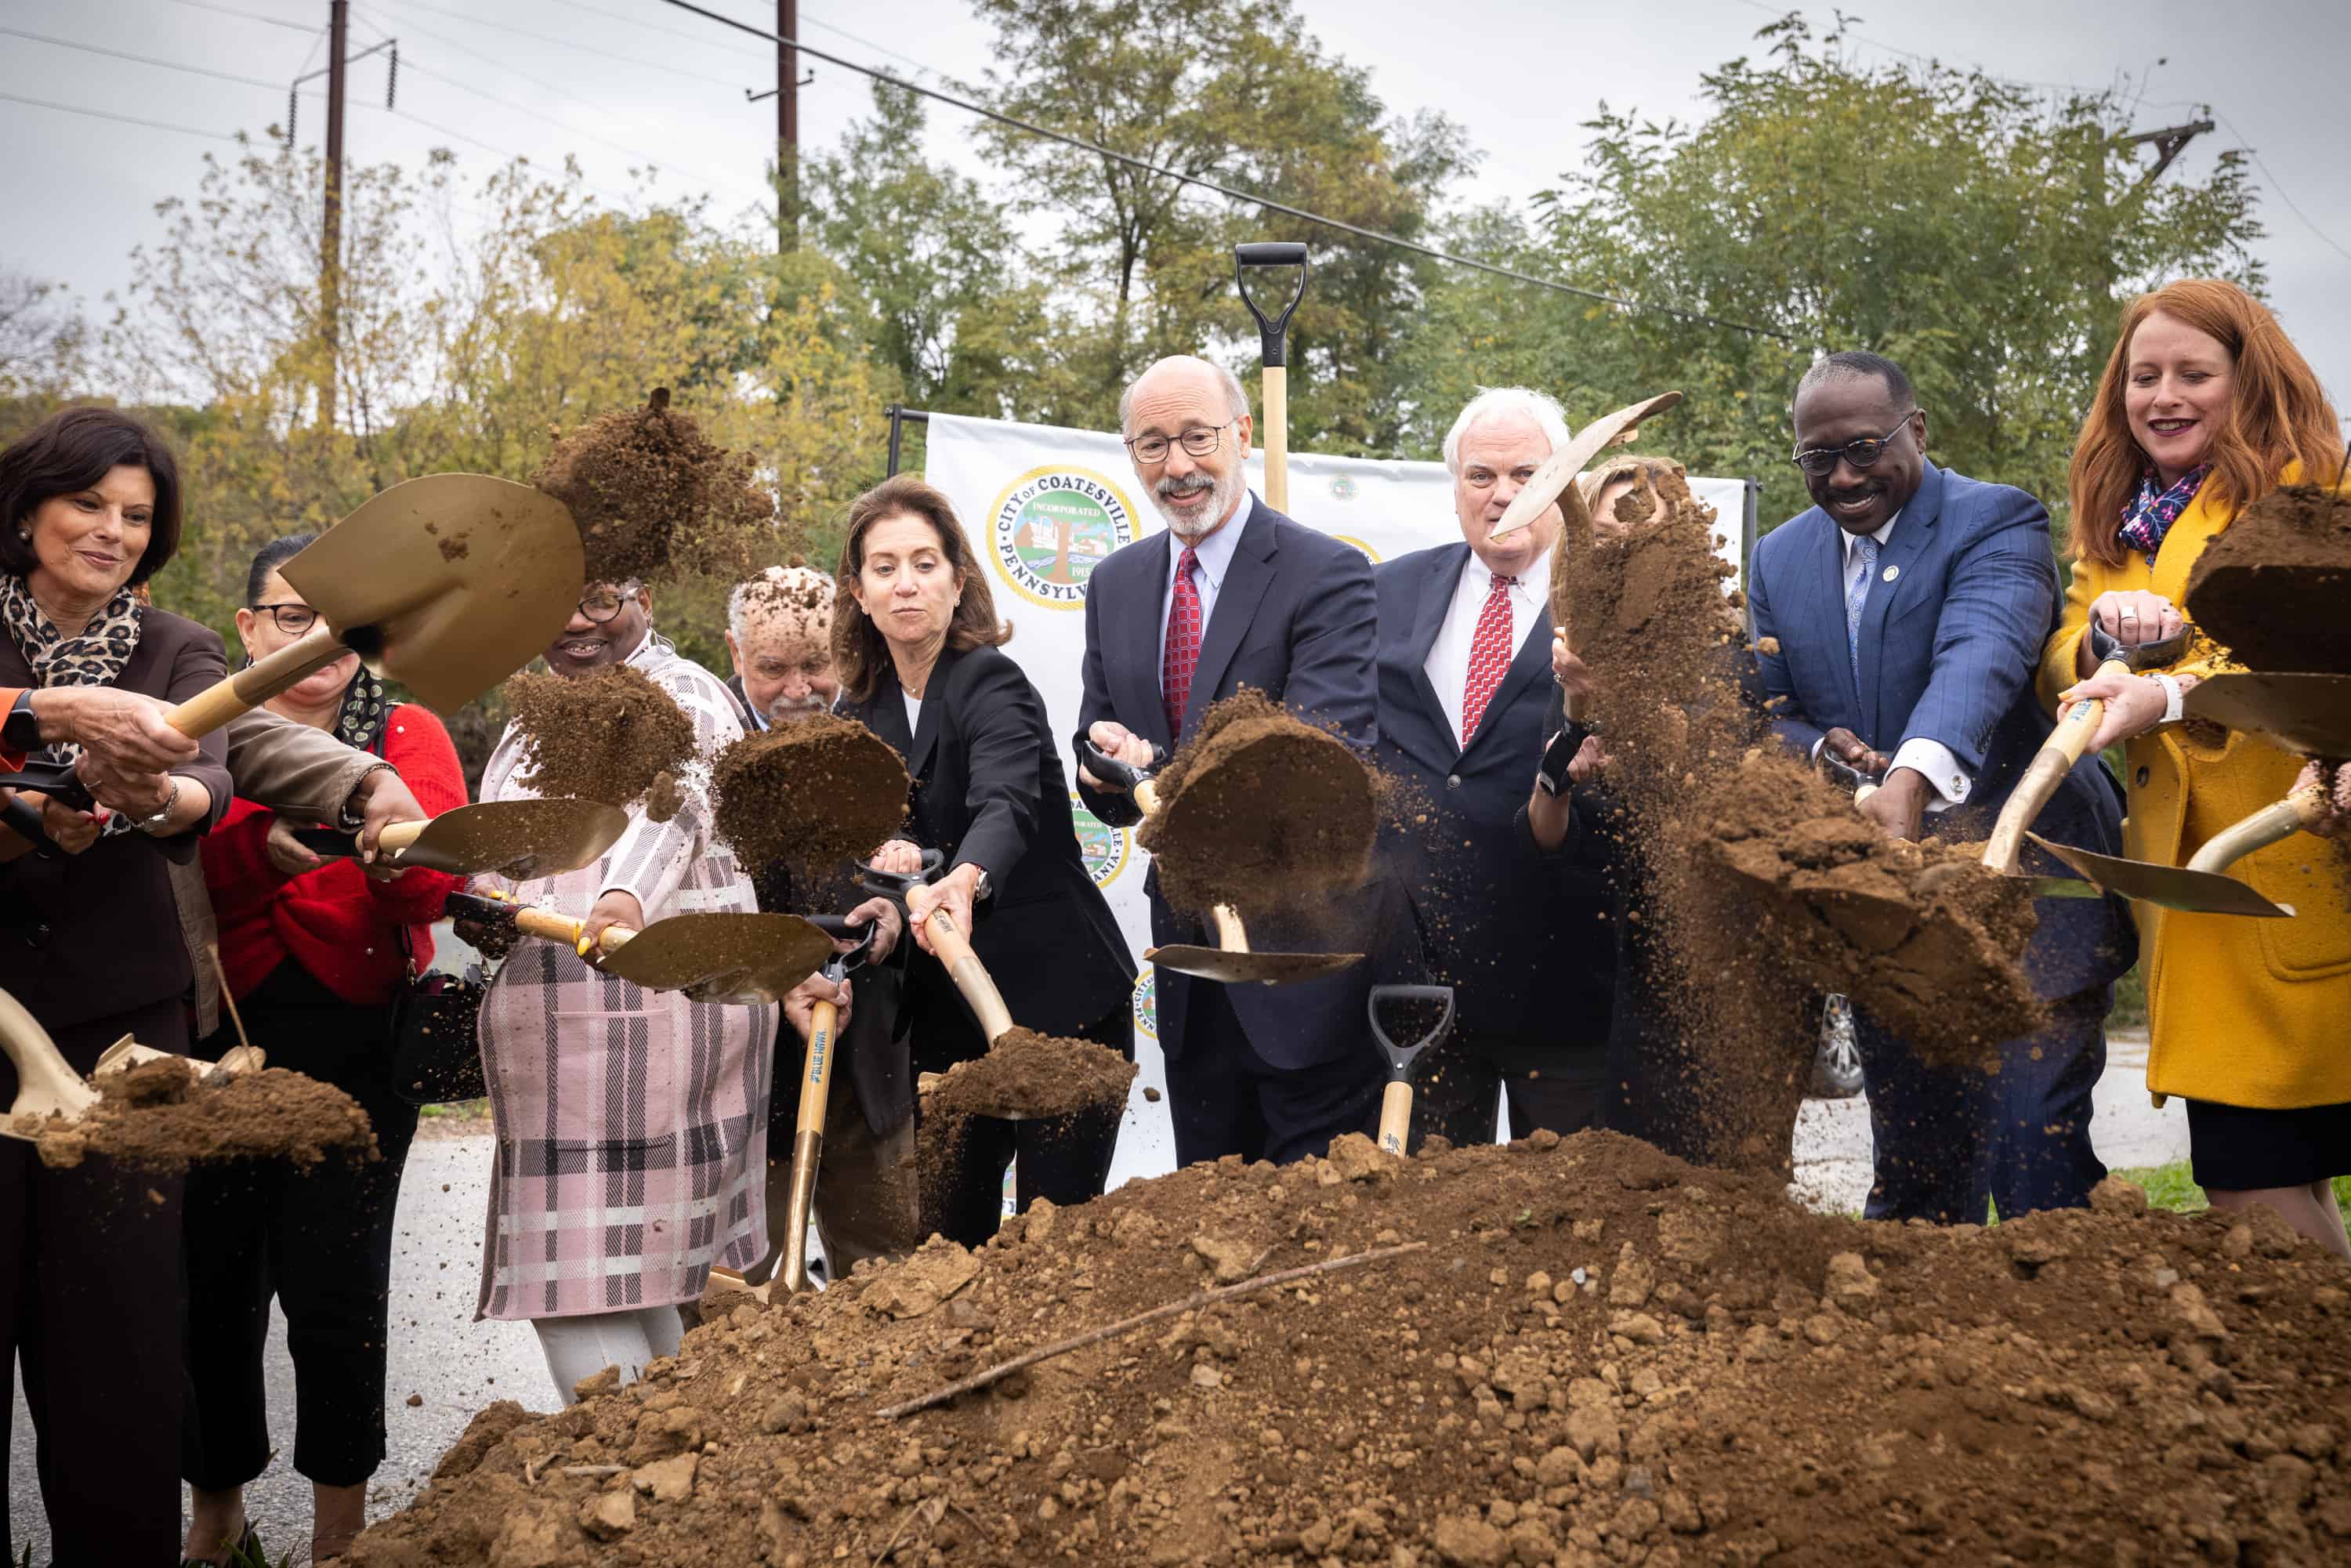 Governor Wolf and other officials break ground at the new Coatesville train station. Their shovels fling dirt toward the camera.